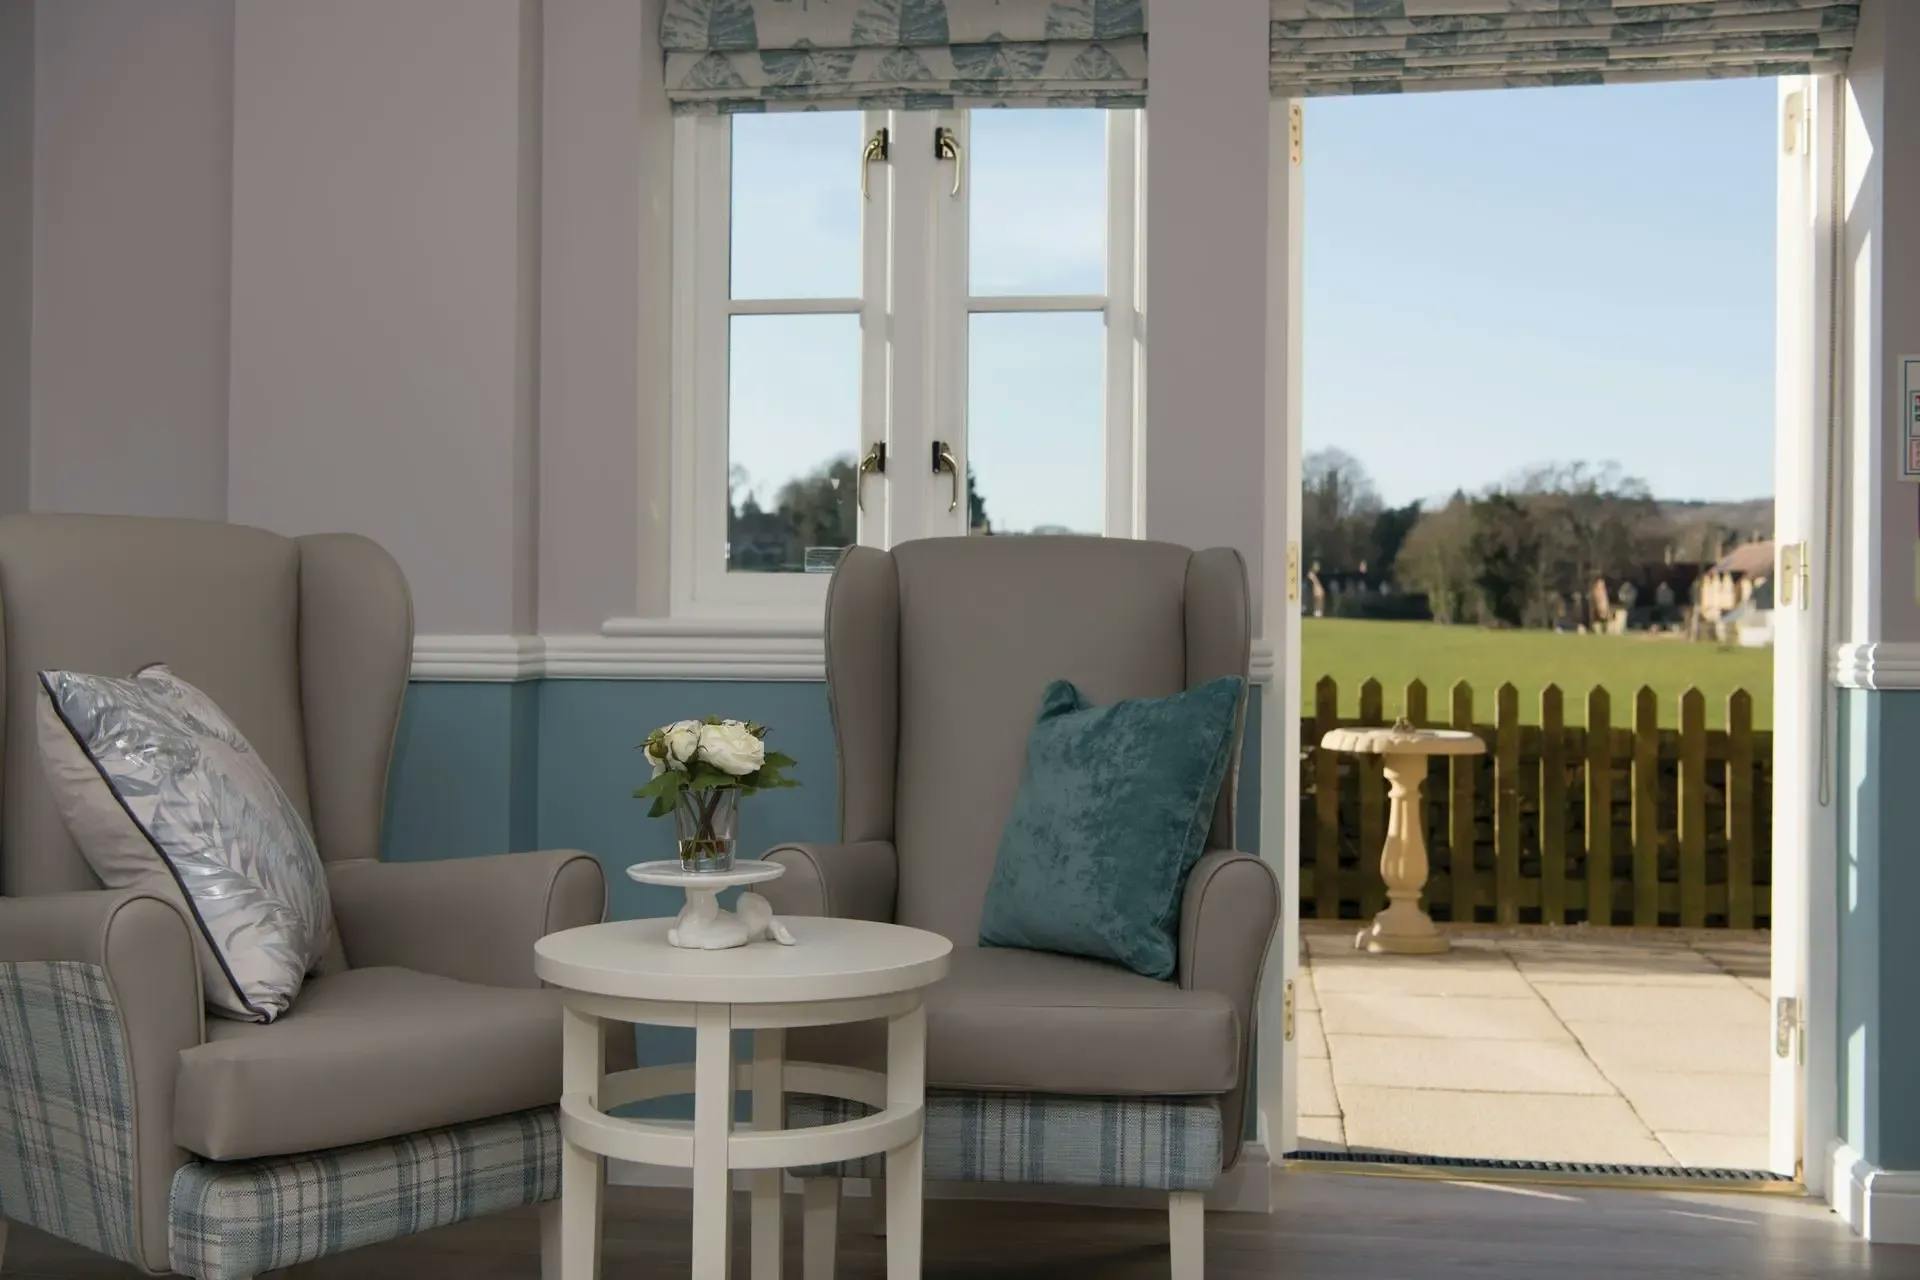 Lounge of Mill house care home in Chipping Campden